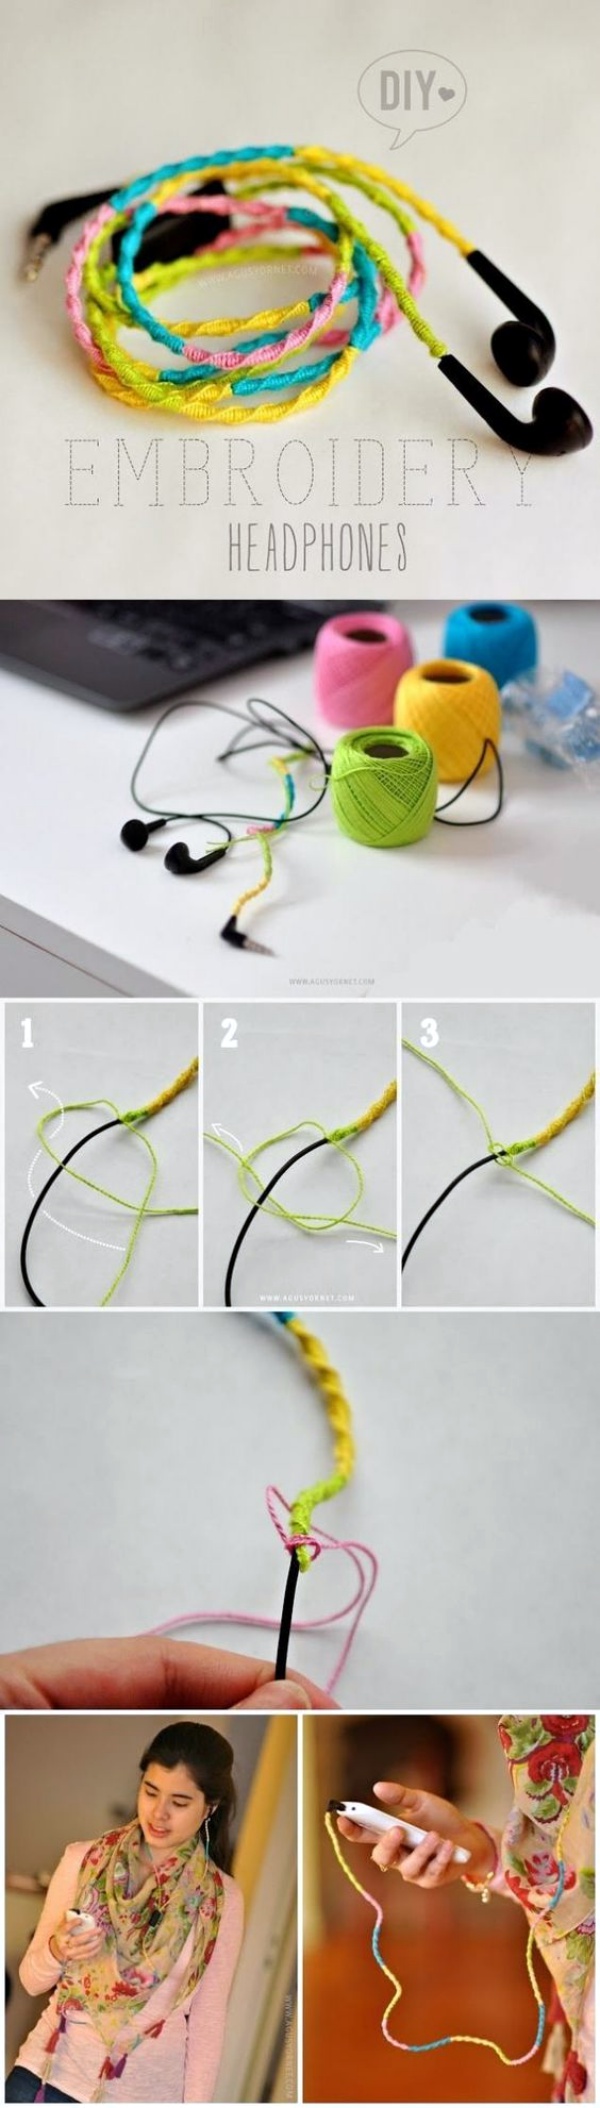 How to make your own Colorful Earphones00015